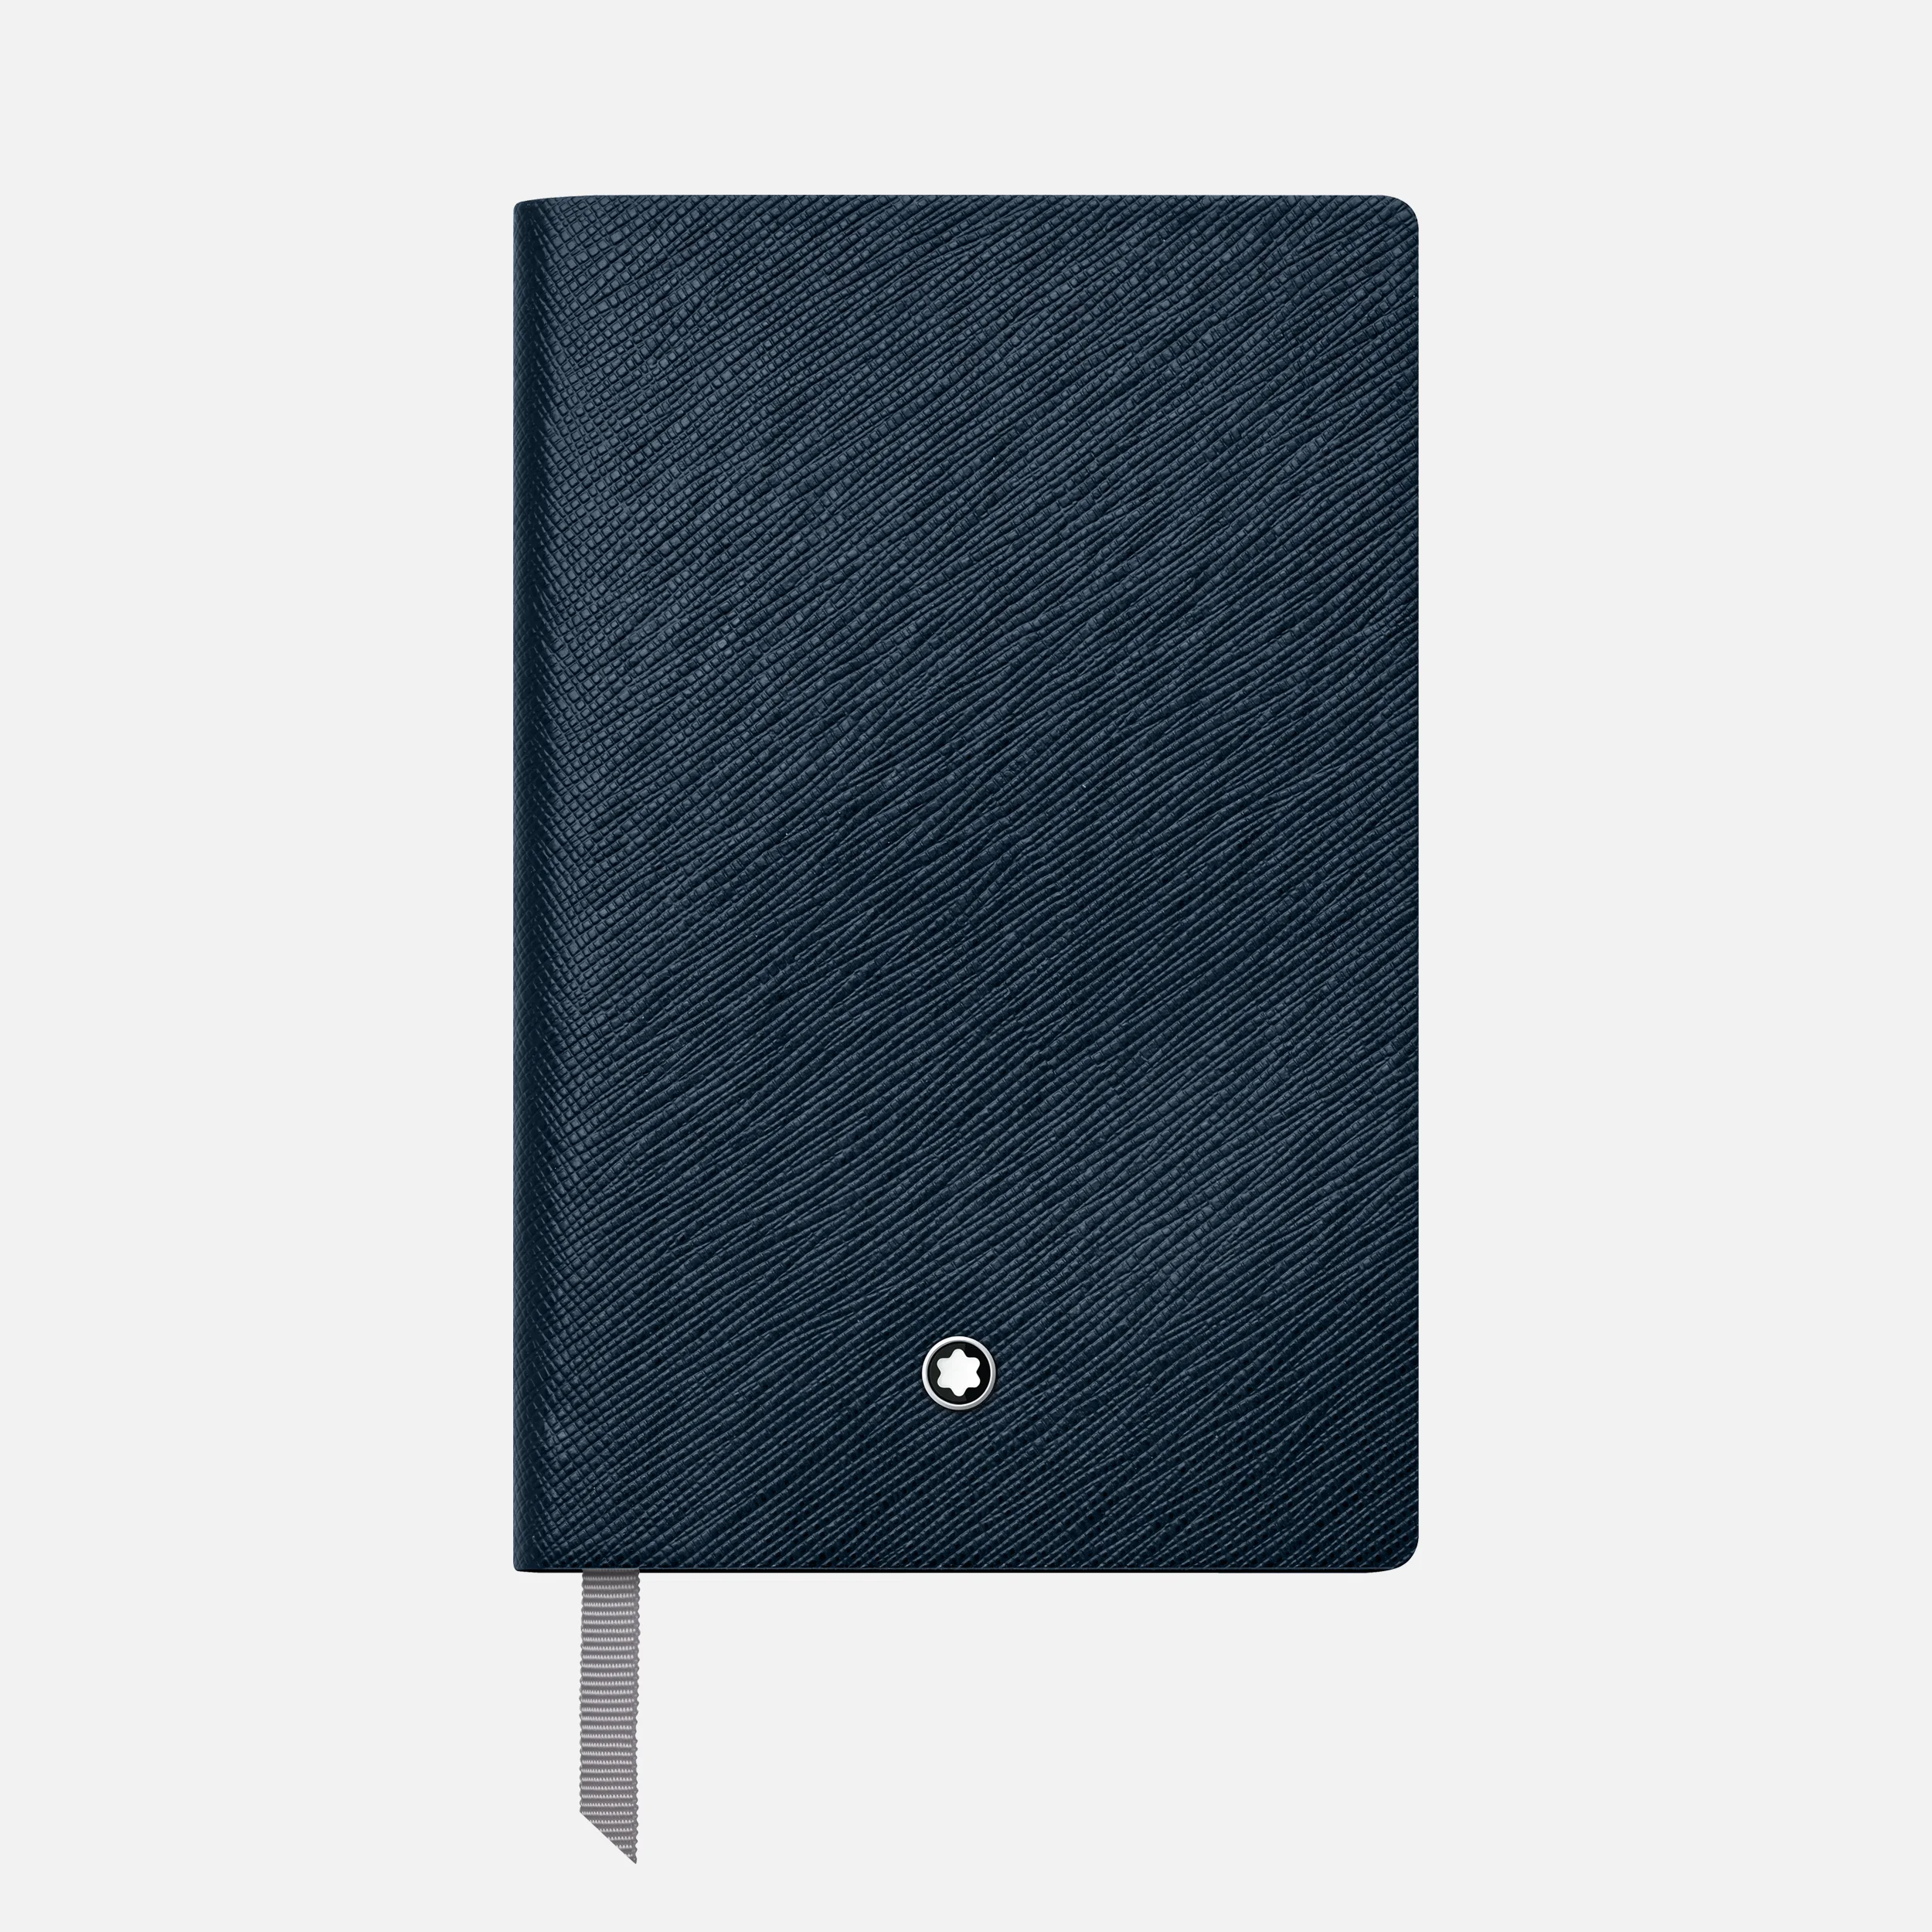 Montblanc Fine Stationery Notebook #148 Meisterstuck Indigo Lined - Pencraft the boutique